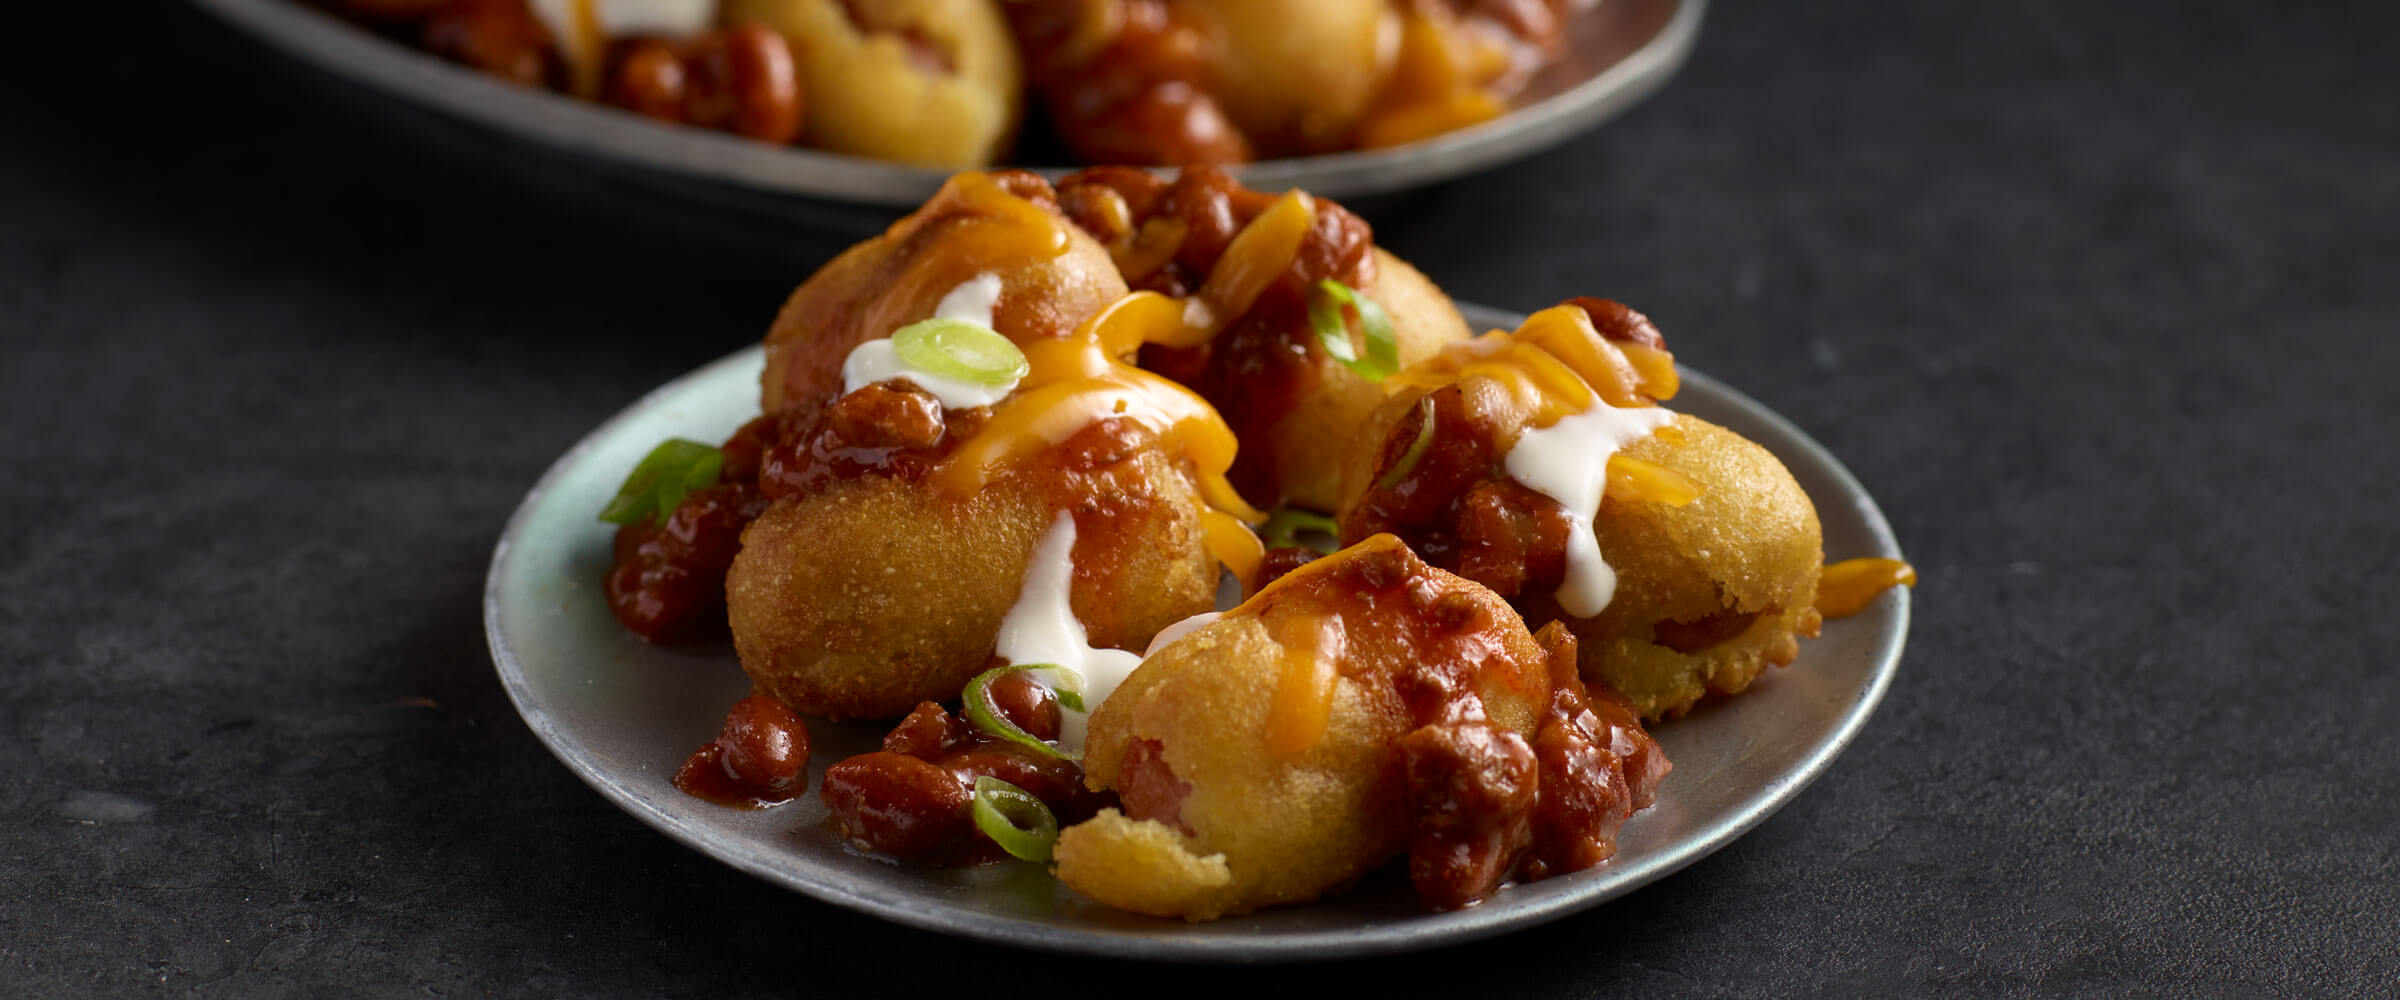 Hot Chili Cheese Corn Dog Bites topped with cheese and sour cream on a plate